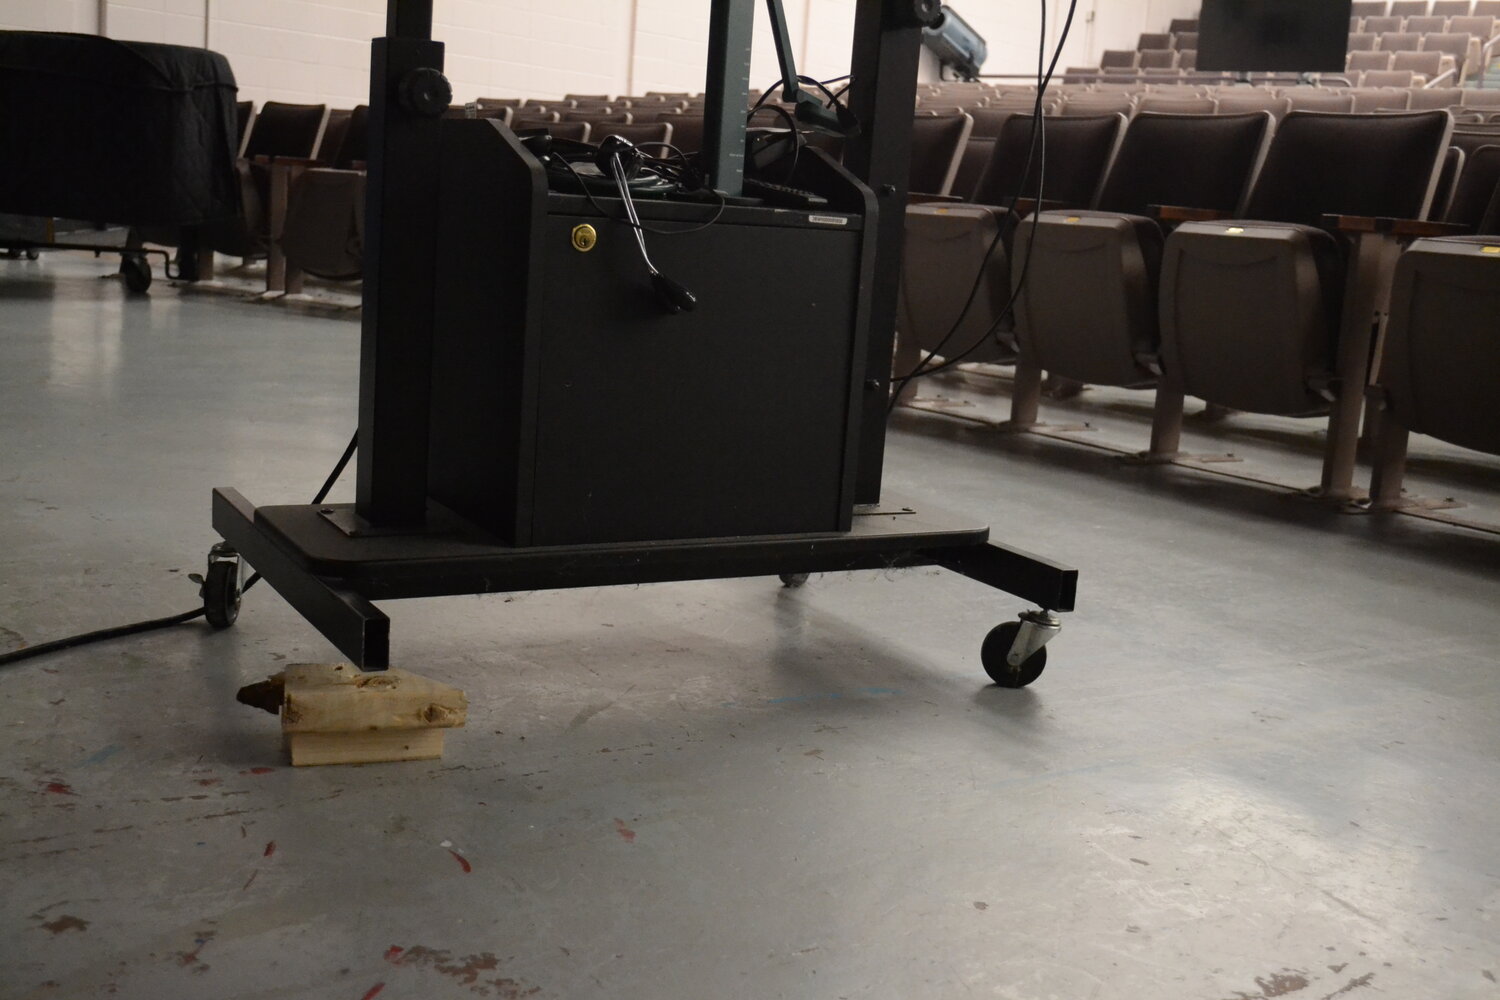 A projector cart is stabilized on a wood block in the school's auditorium.